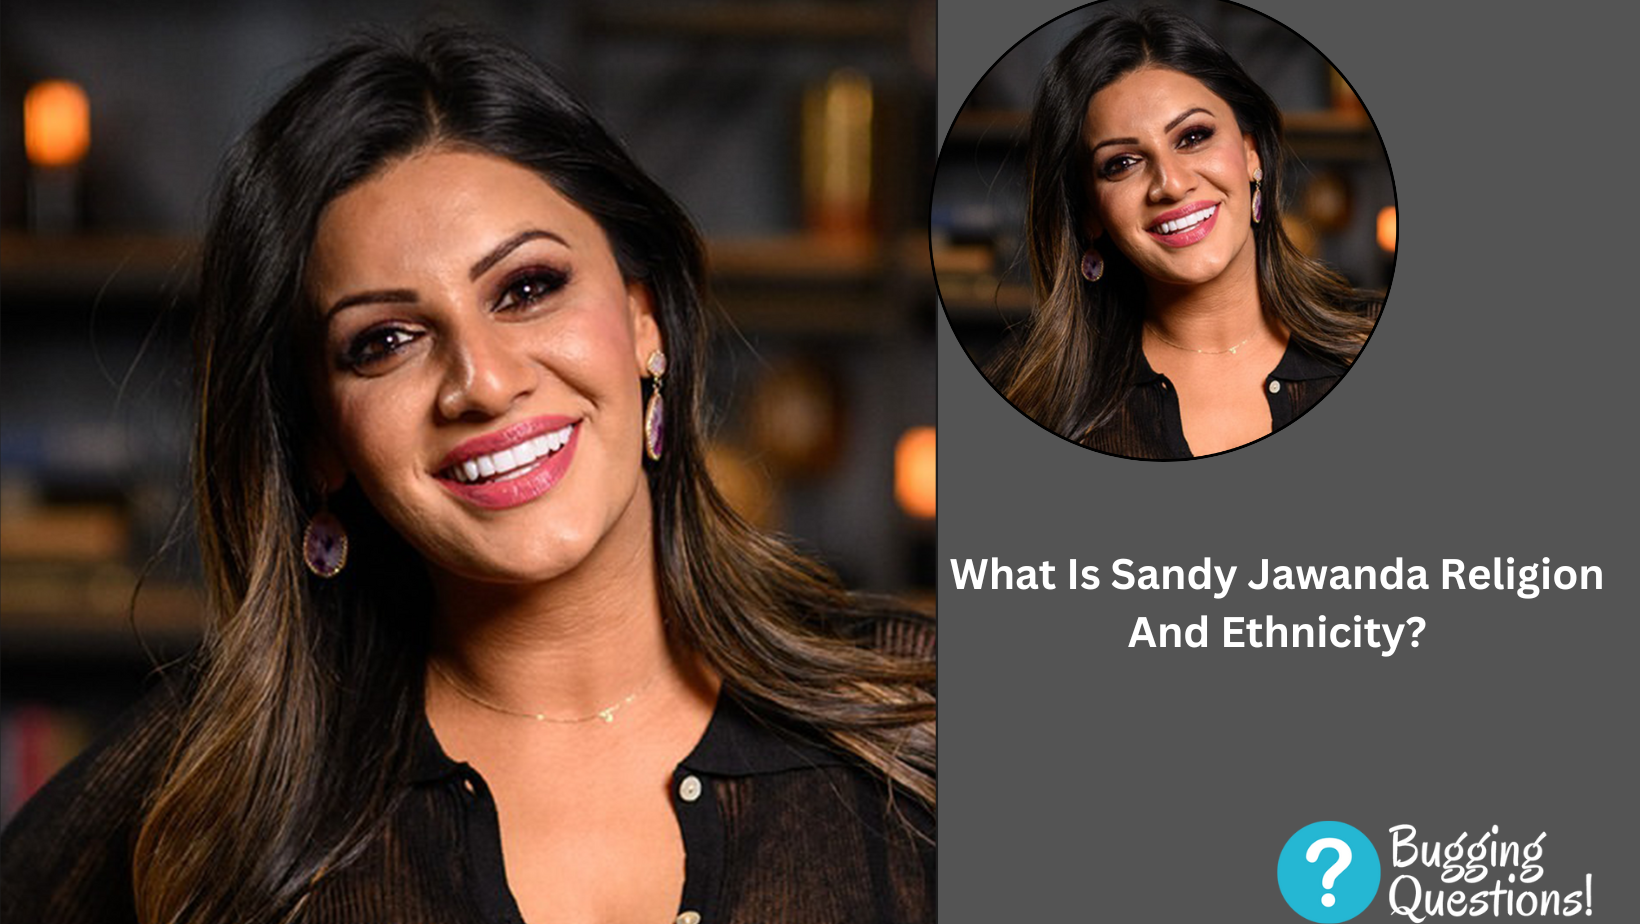 What Is Sandy Jawanda Religion And Ethnicity?